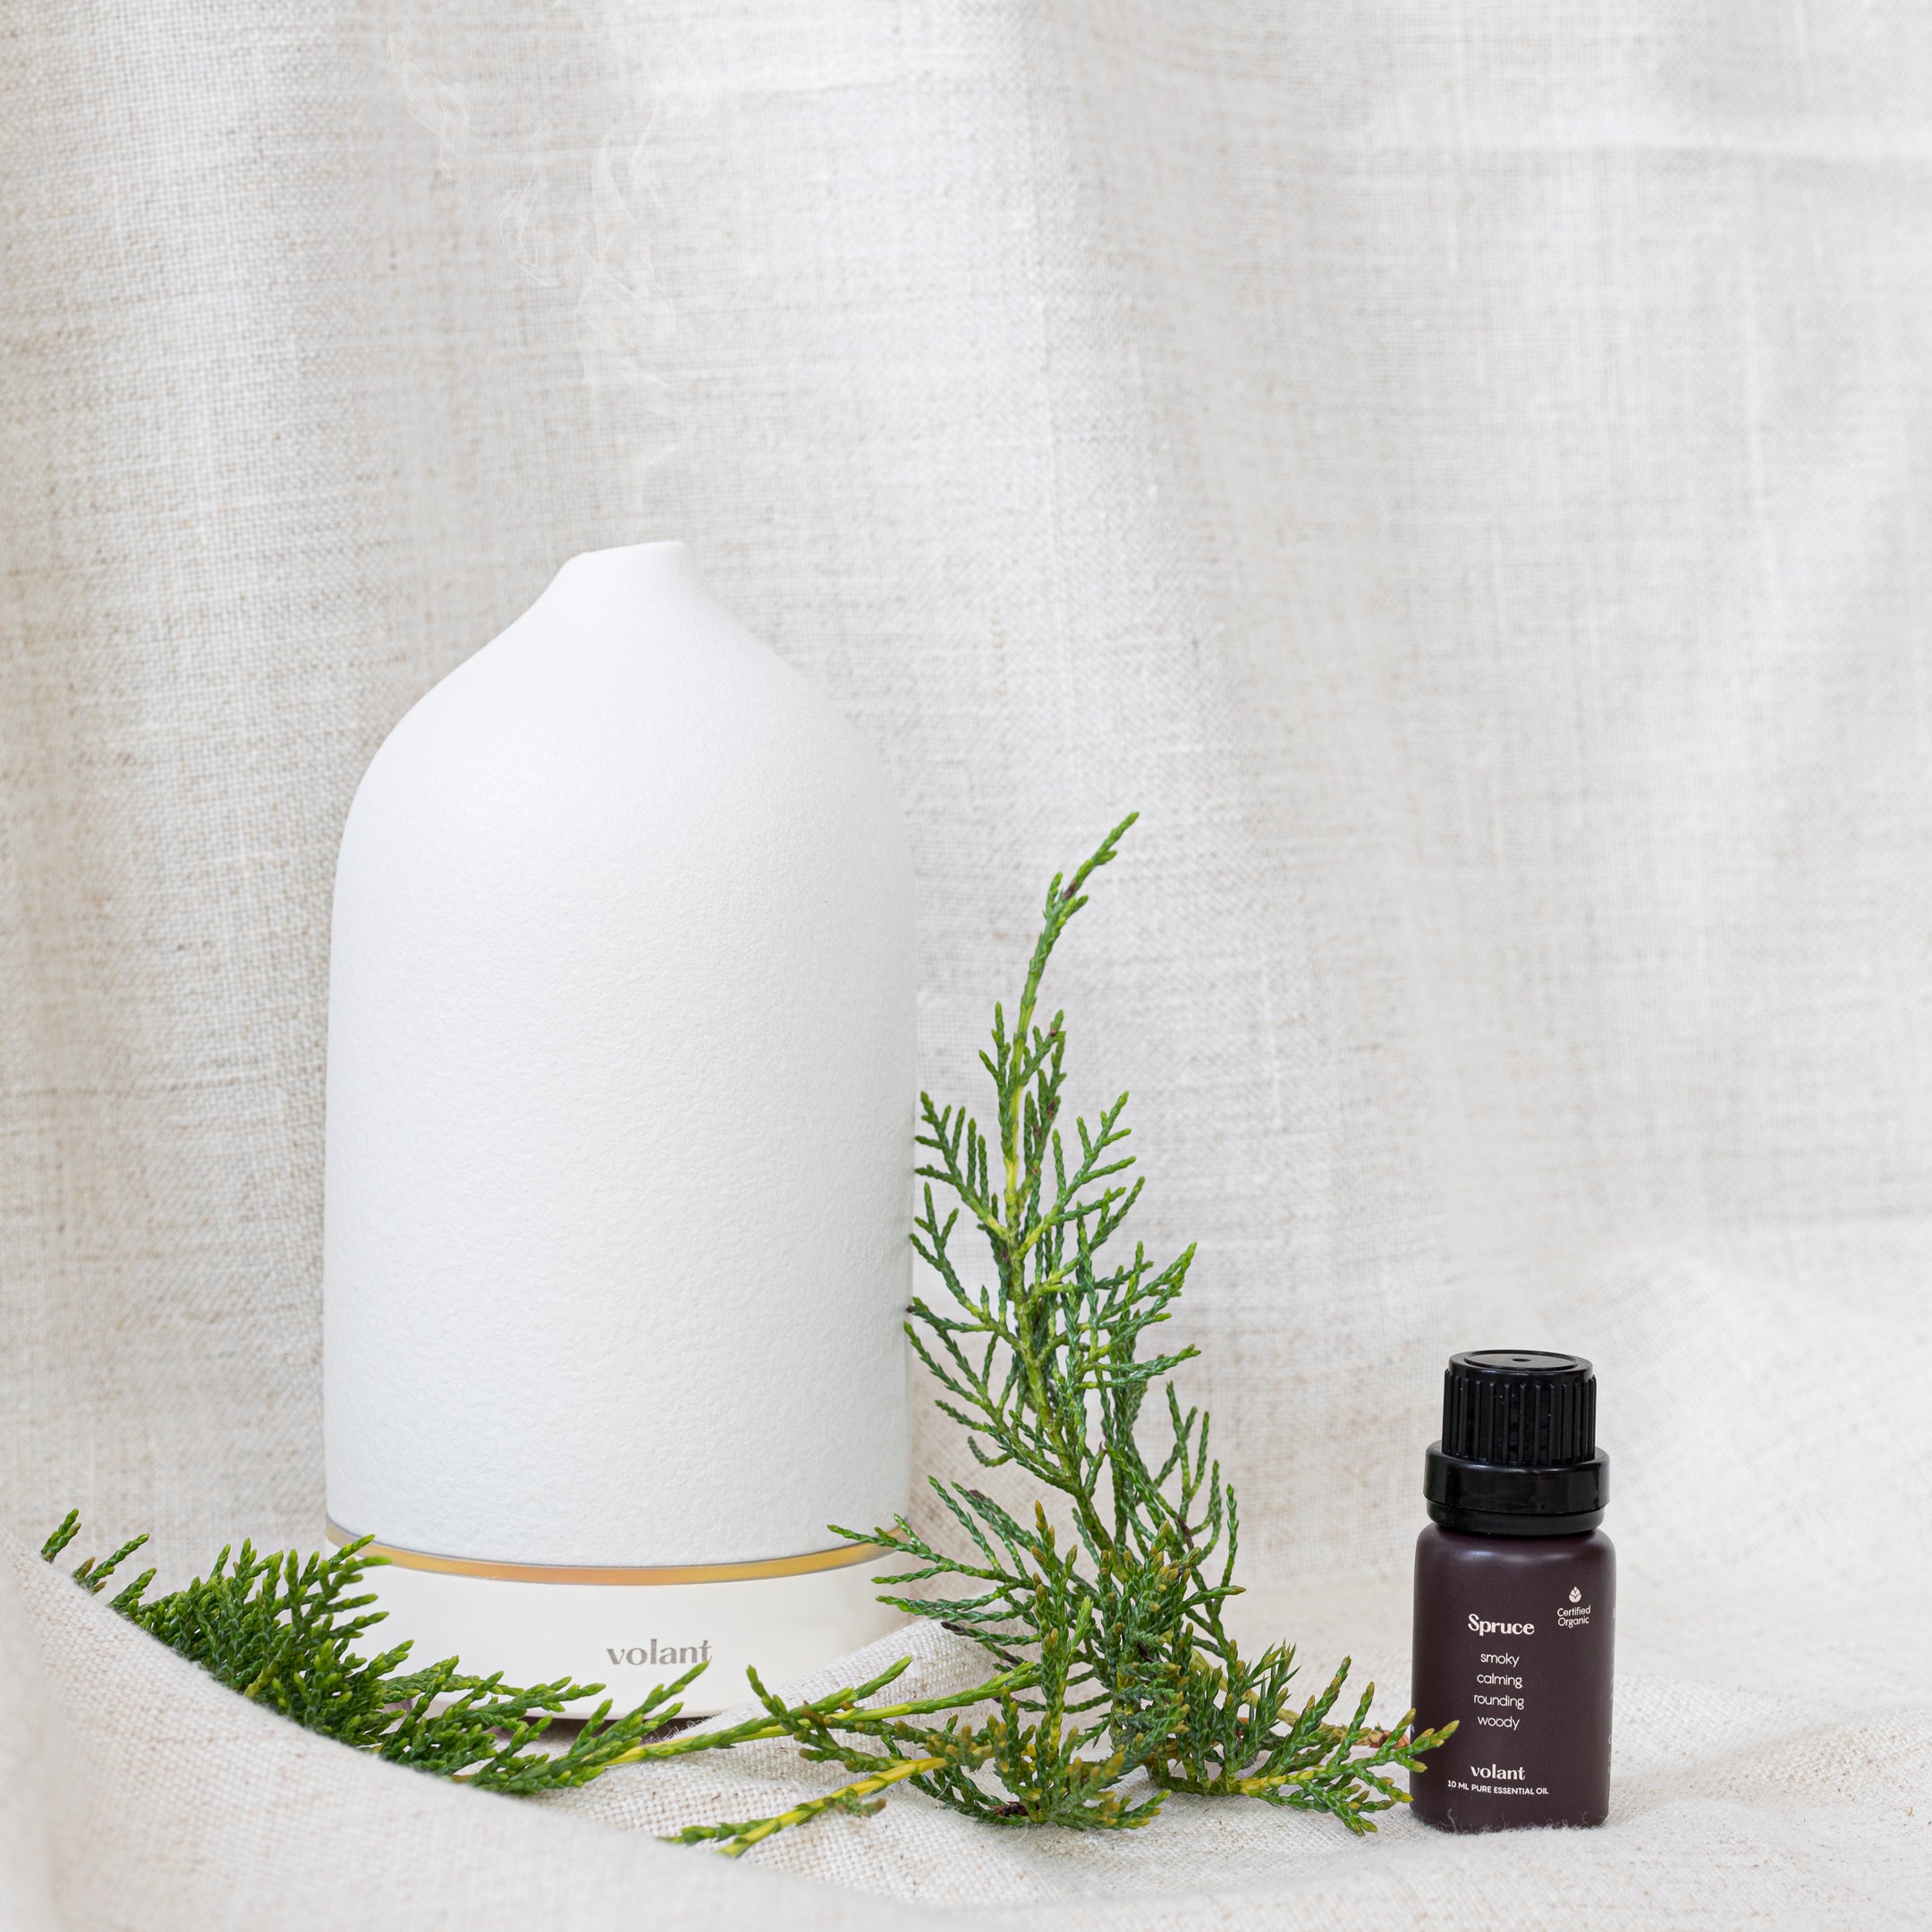 volant white diffuser using organic spruce essential oil for nature like smell in your  home